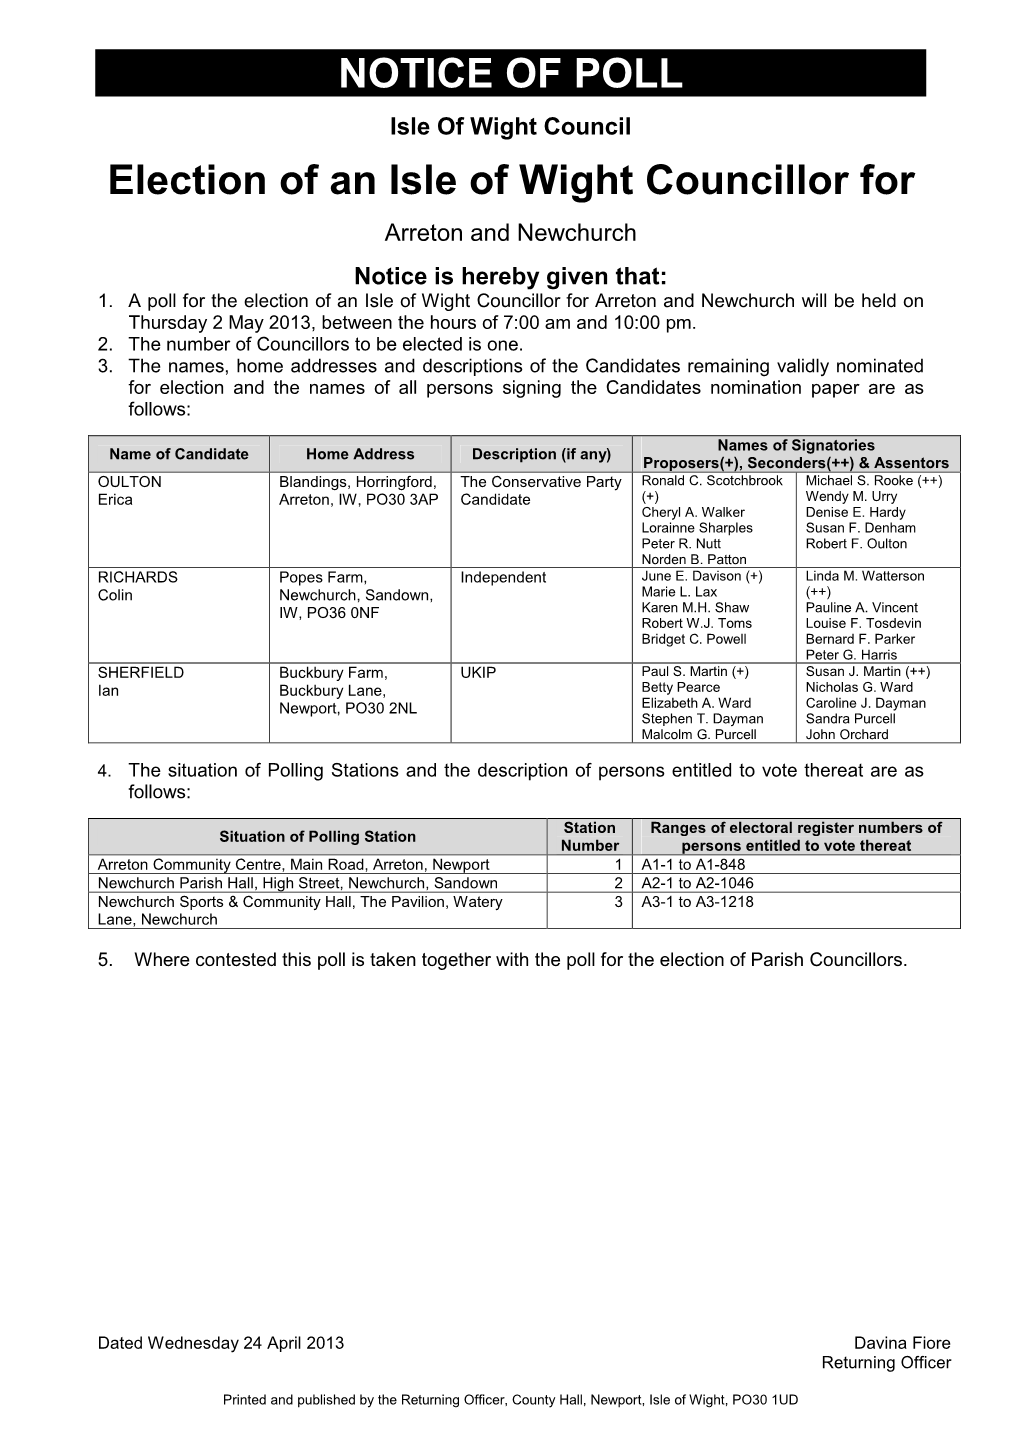 NOTICE of POLL Election of an Isle of Wight Councillor